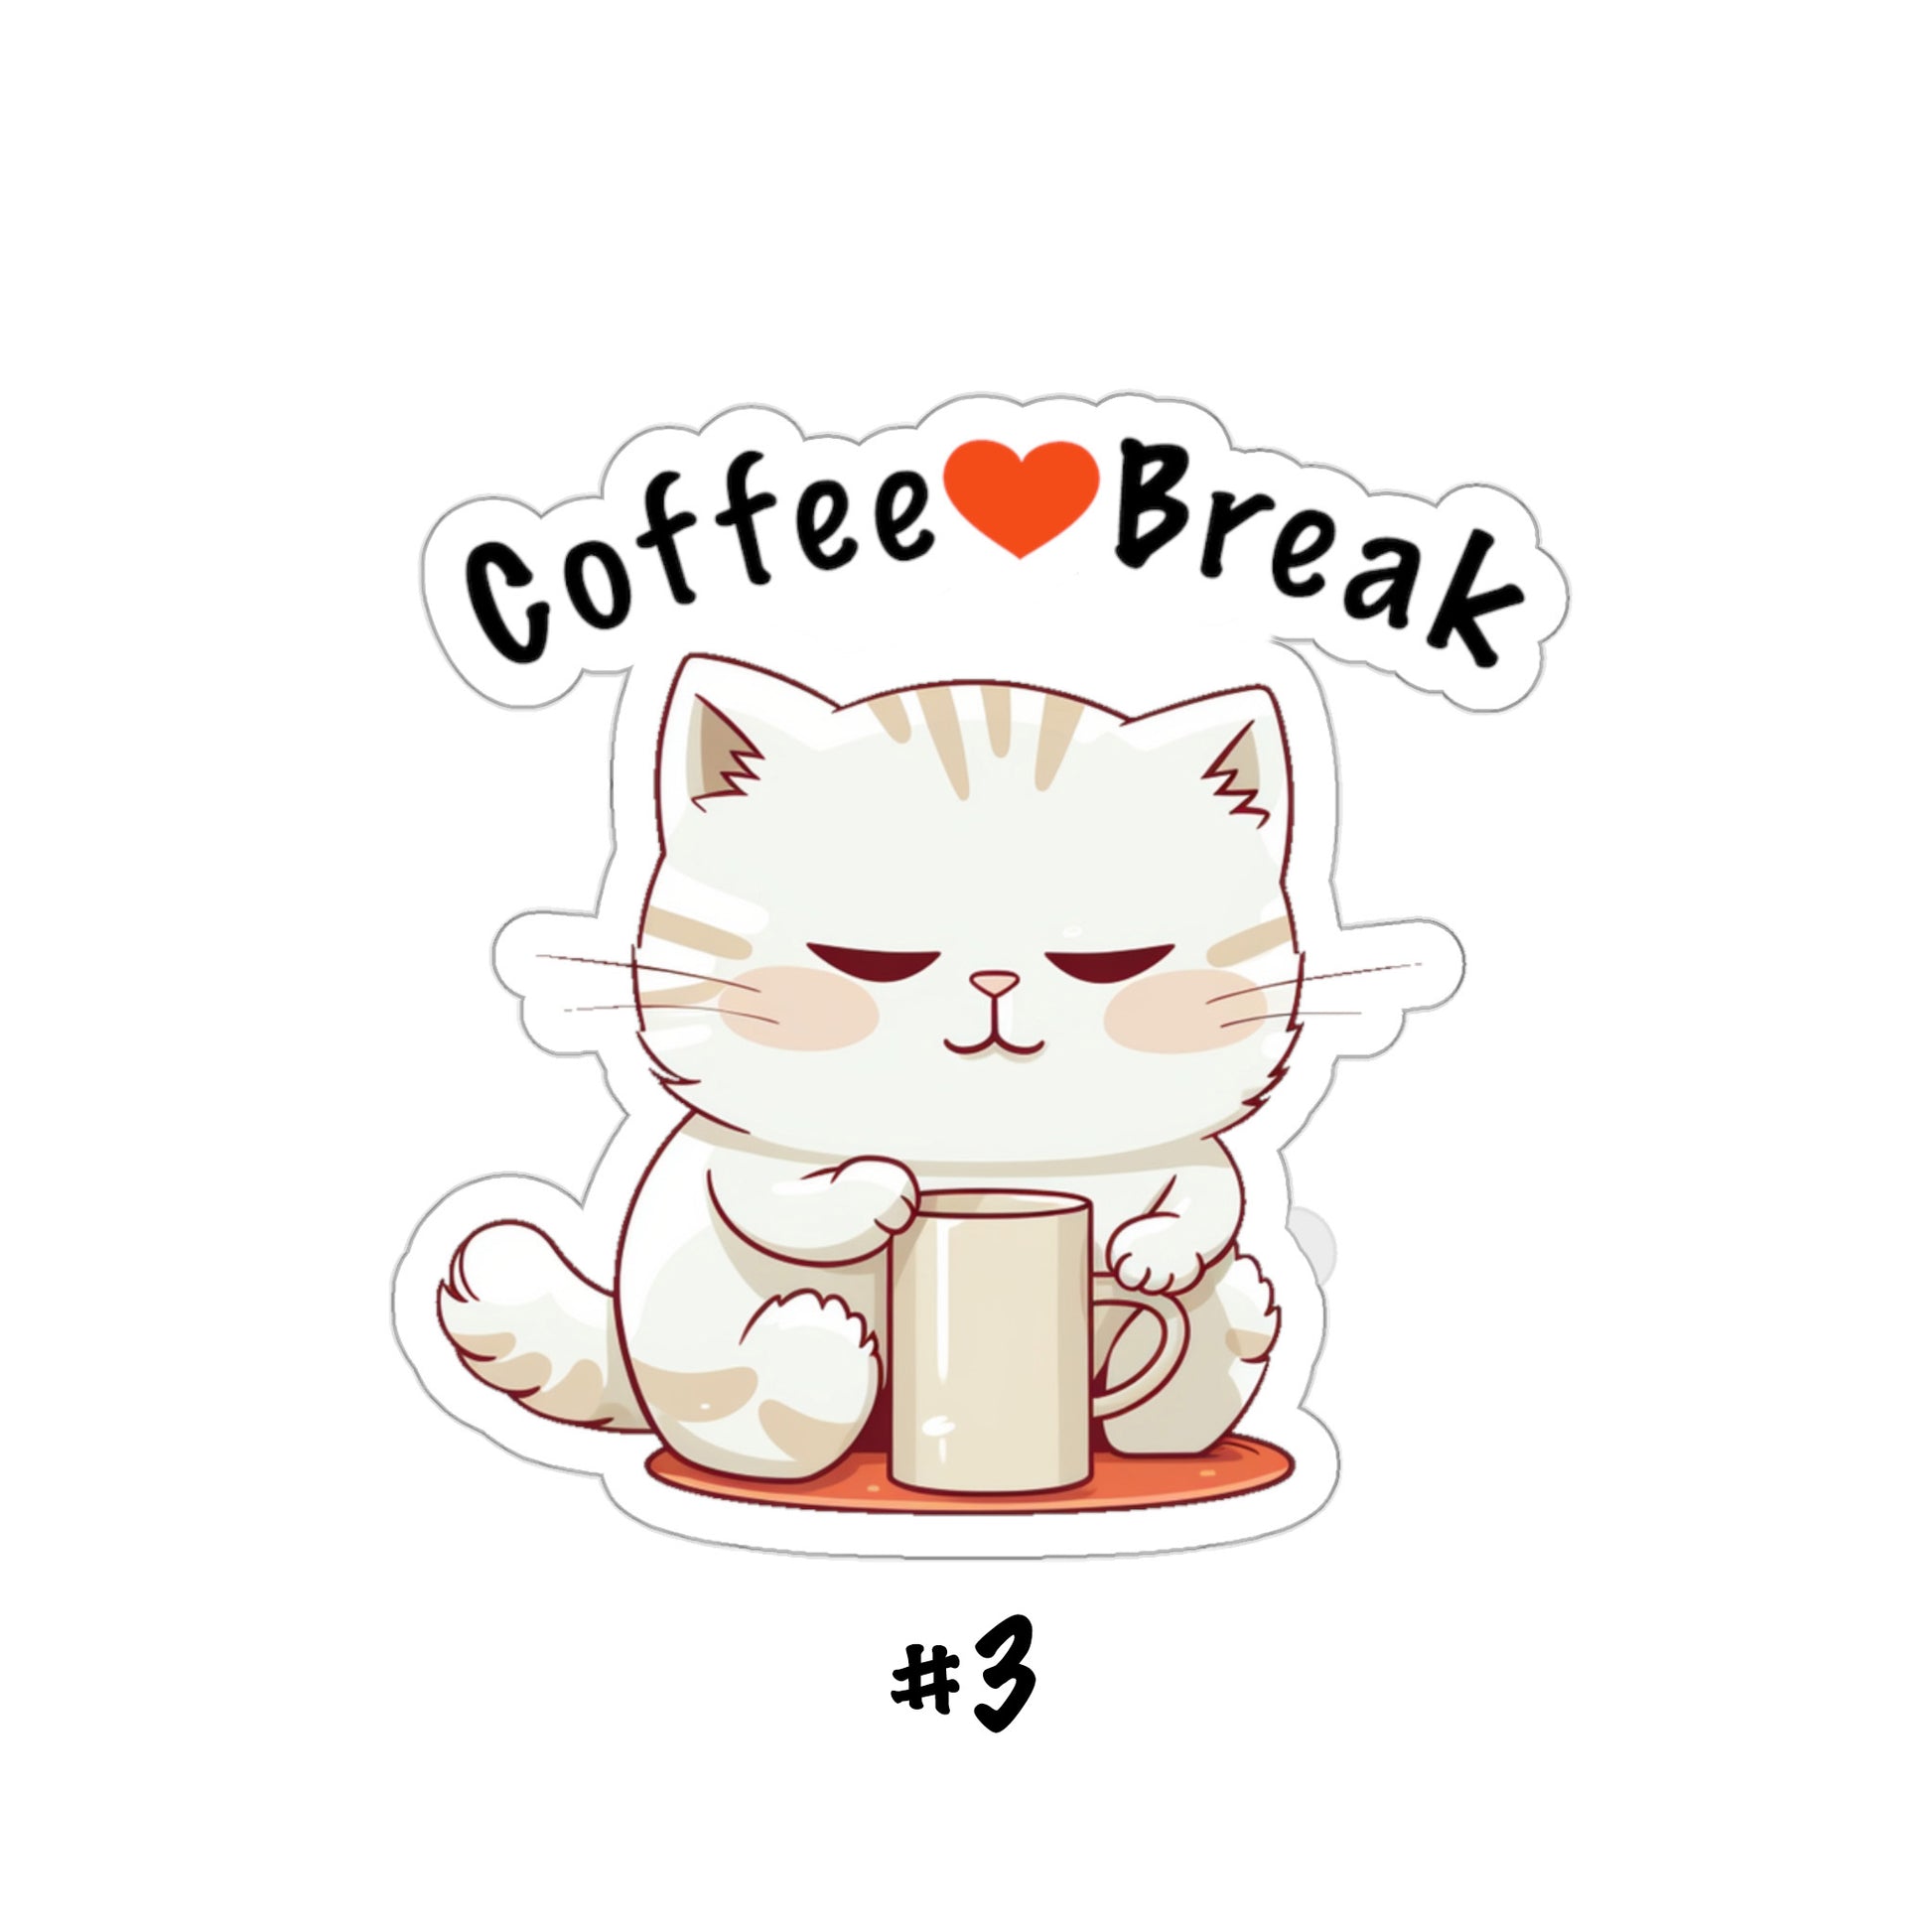 Silly Cat Fam – LINE stickers